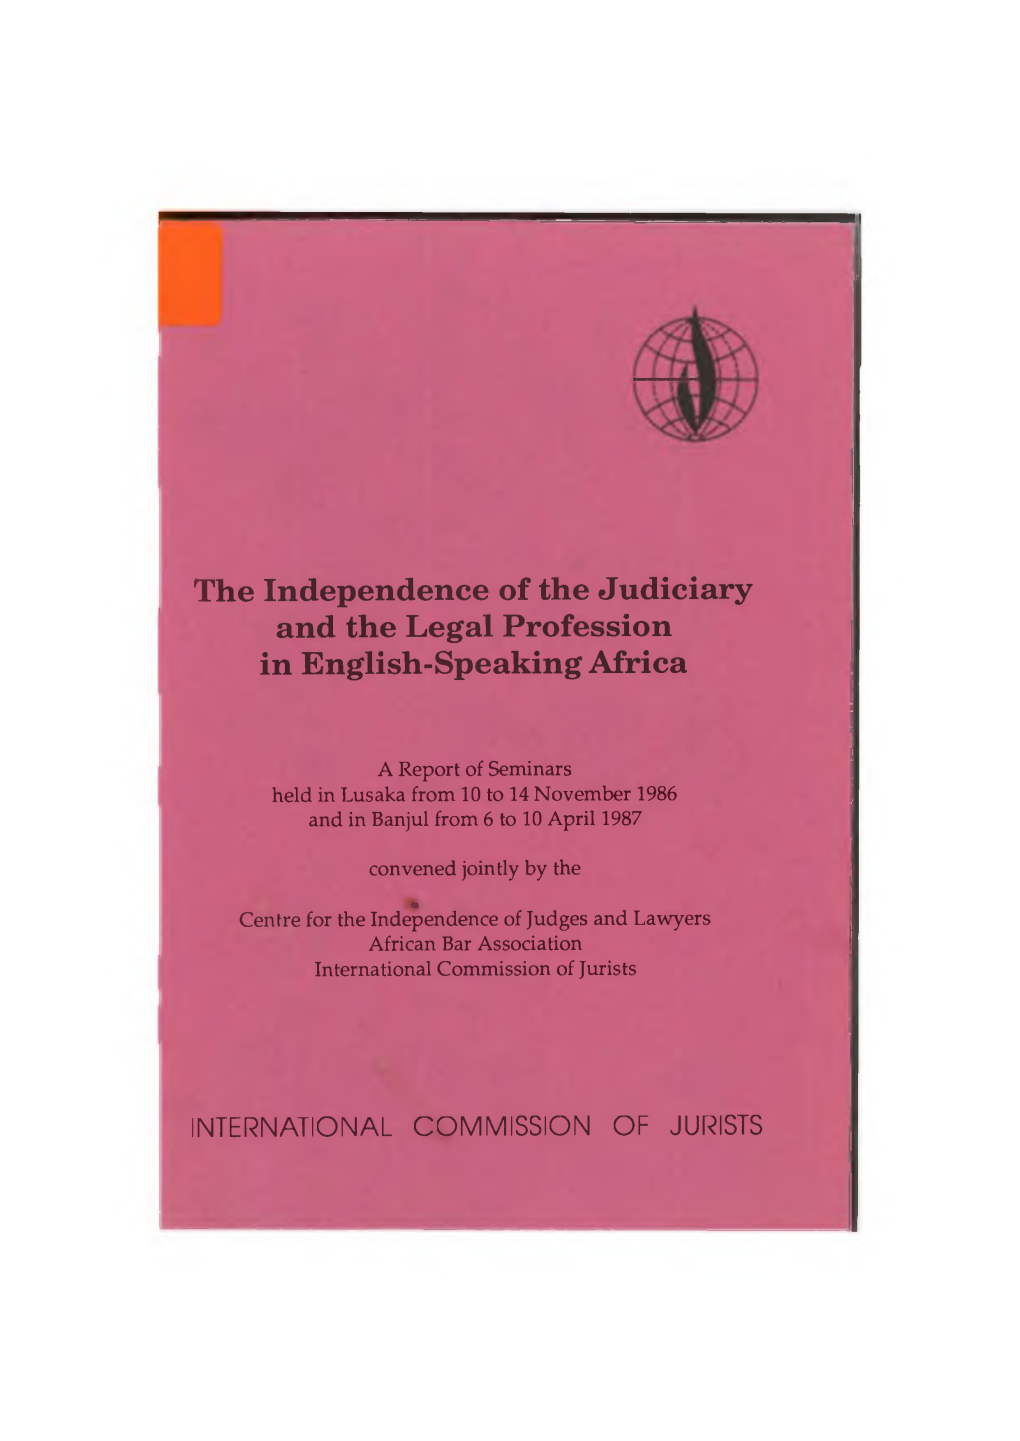 The Independence of the Judiciary and the Legal Profession in English-Speaking Africa